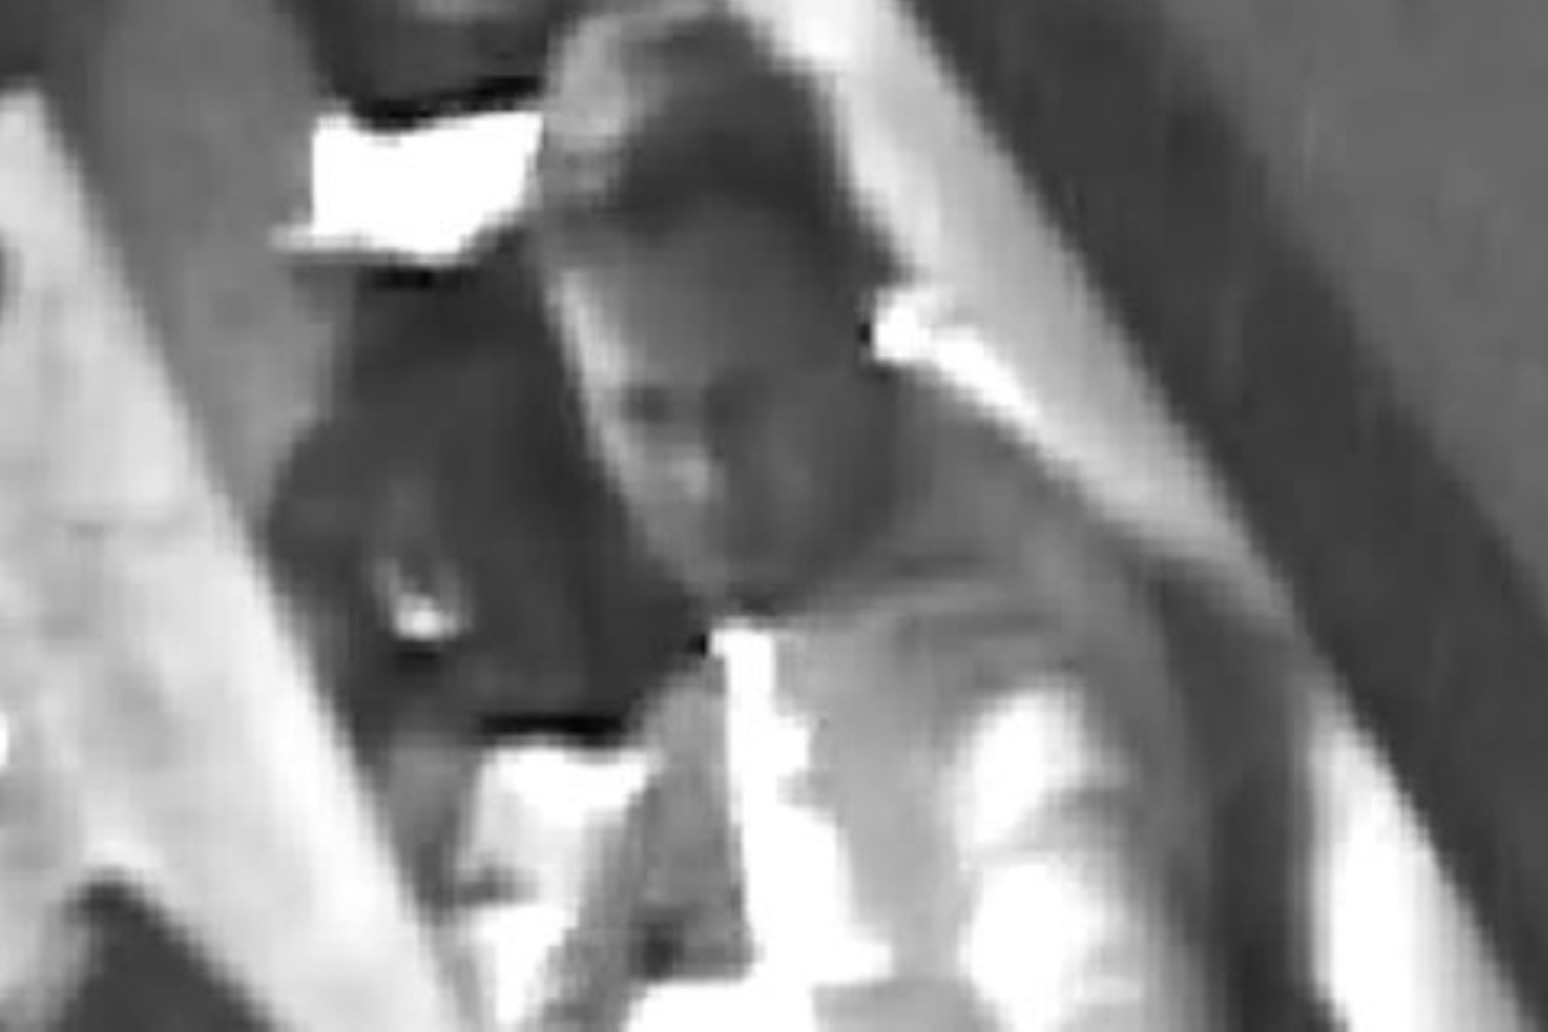 Images released of four men following racist attack at London pub 